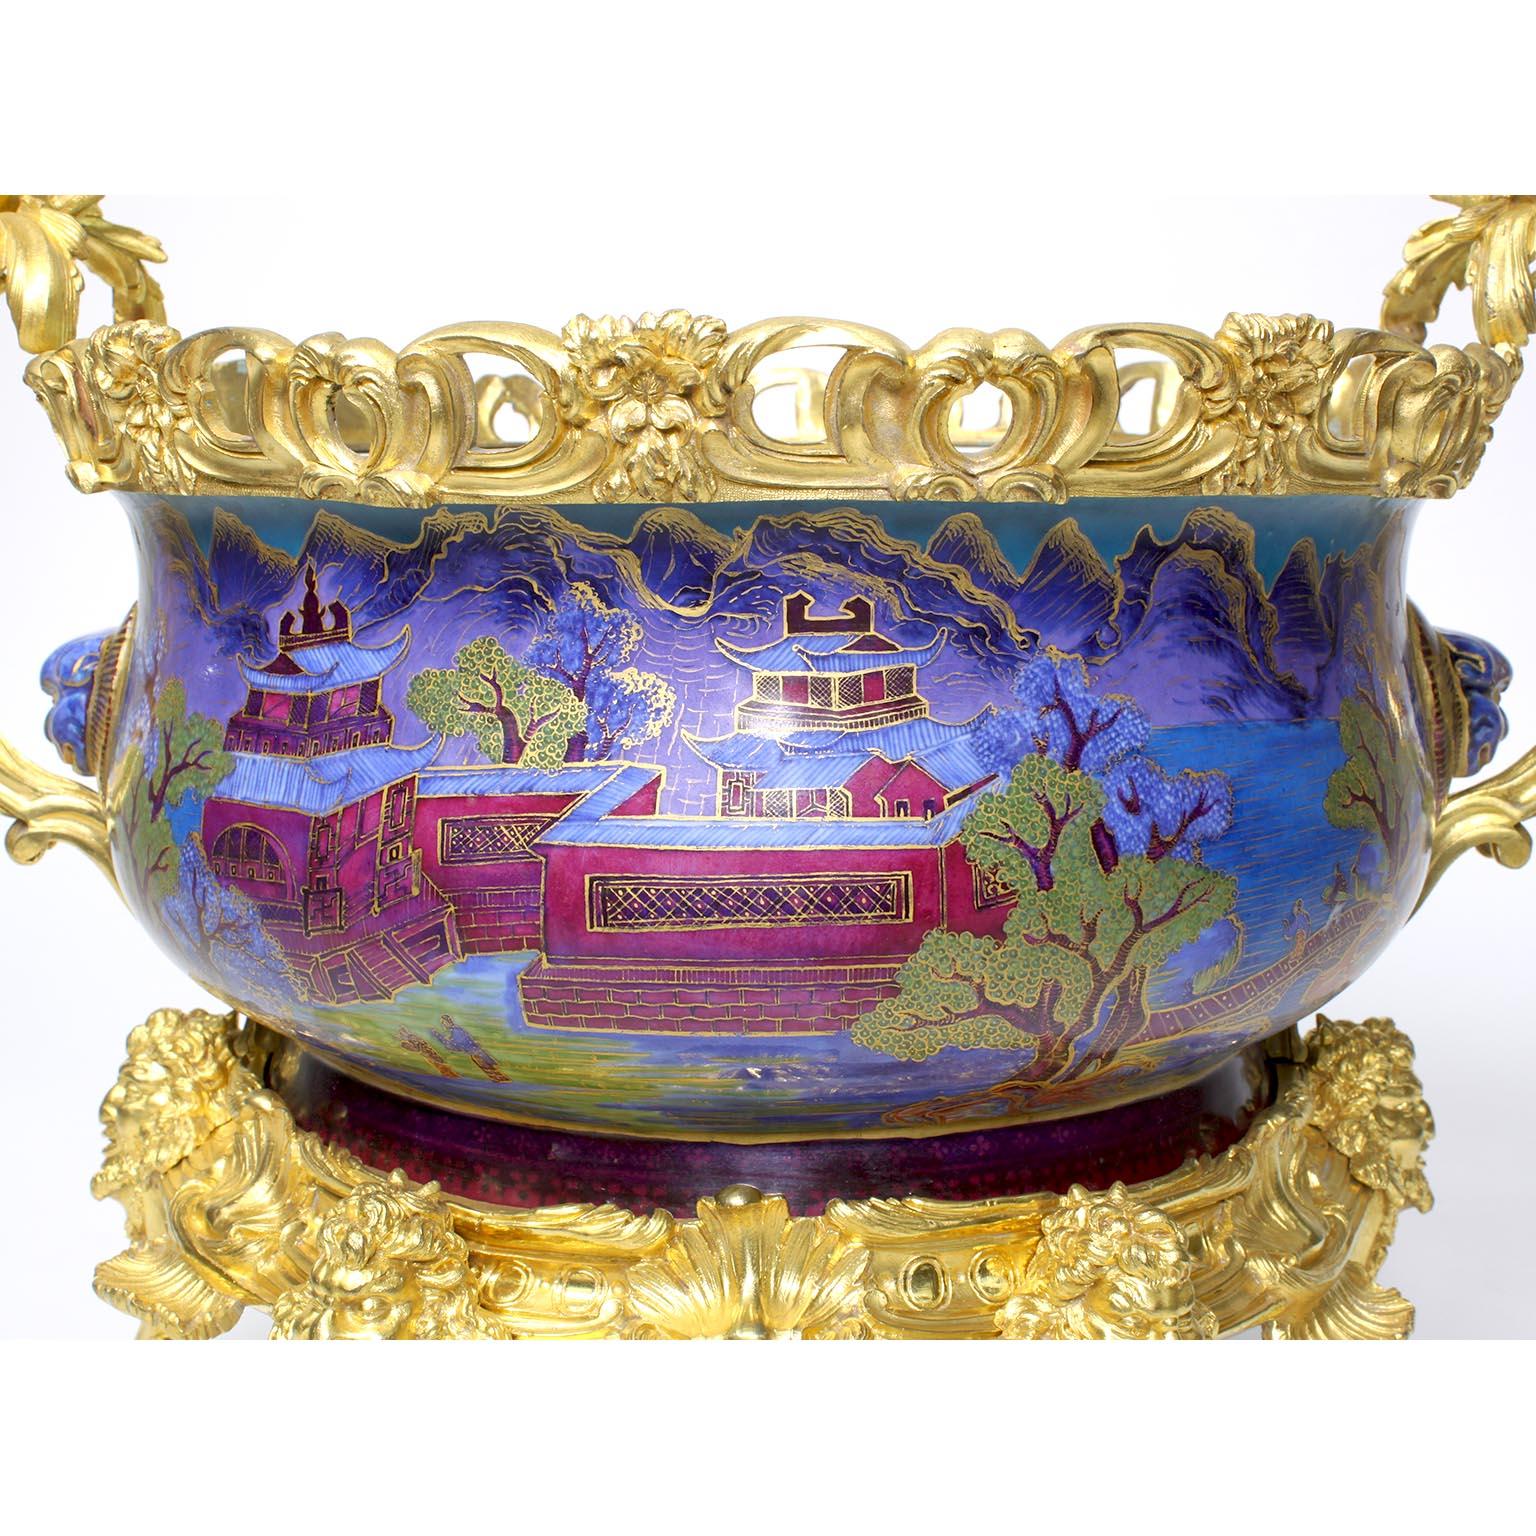 Chinese Export Famille Verte Porcelain & French Ormolu Chinoiserie Centerpiece For Sale 2